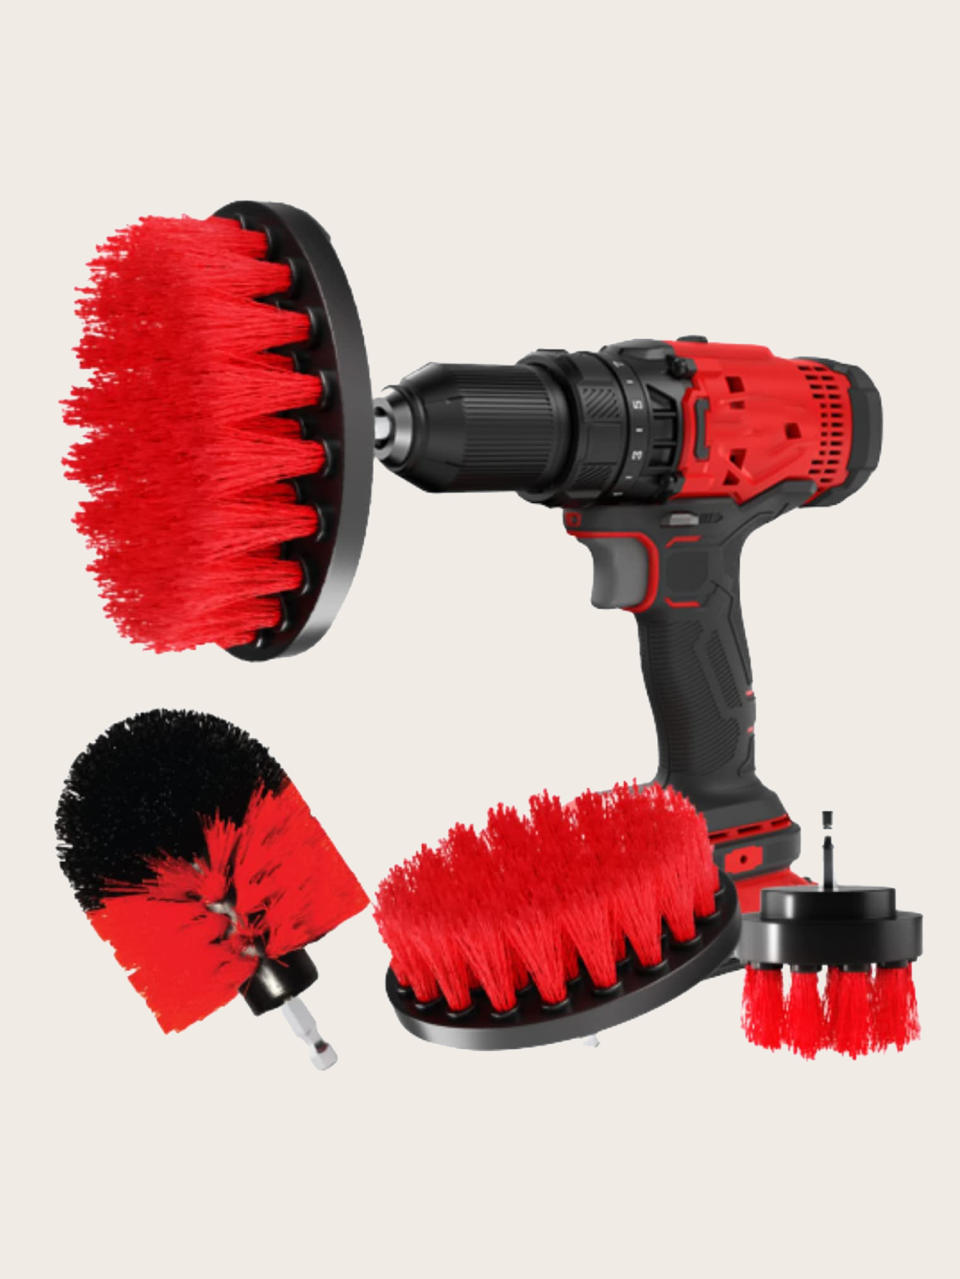 Black and red drill with black and red brush attachments.